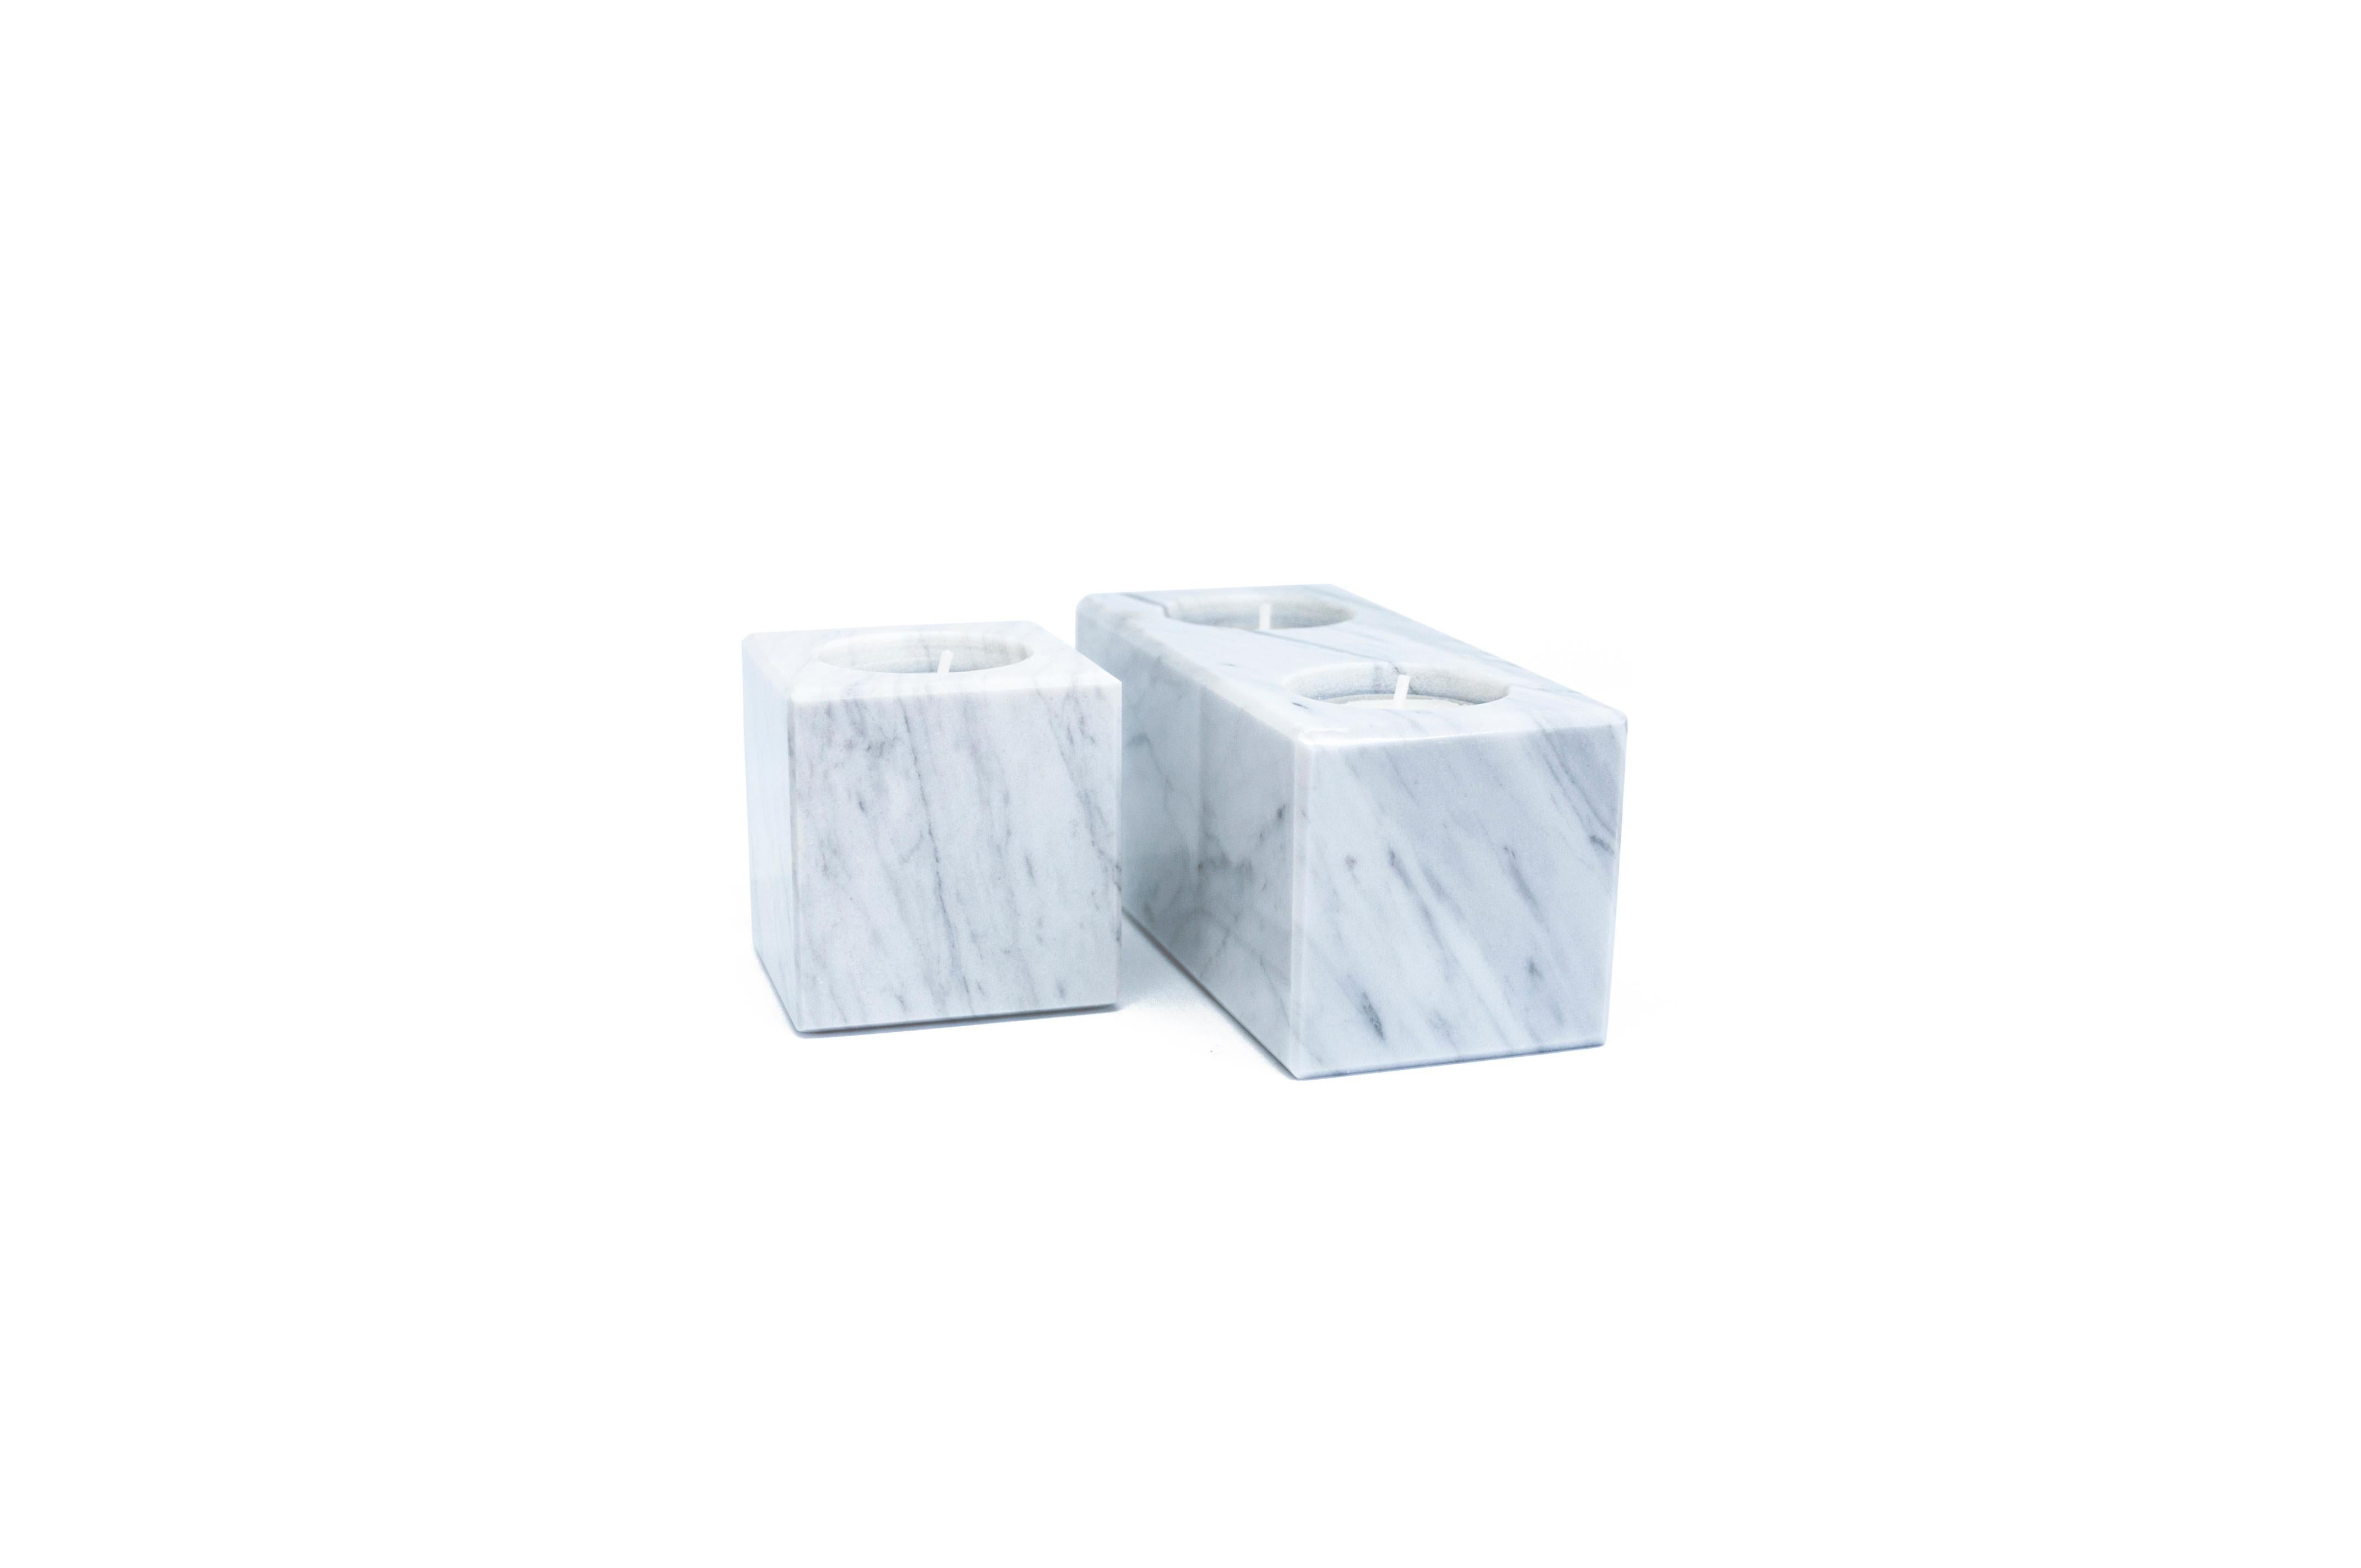 Squared Single Candleholder in White Carrara Marble 4